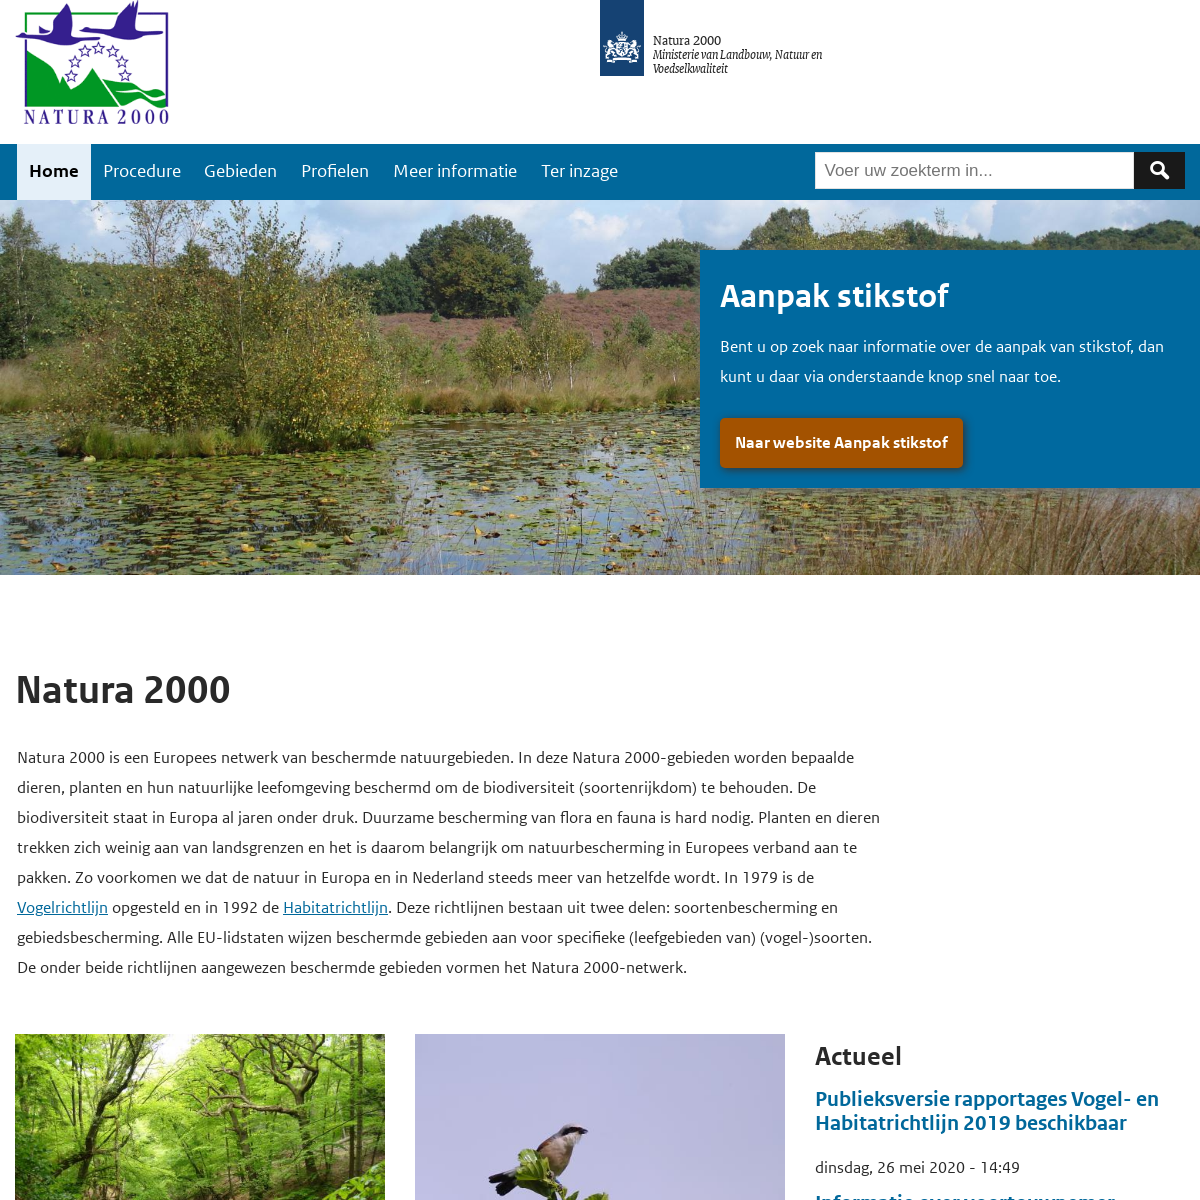 A complete backup of natura2000.nl